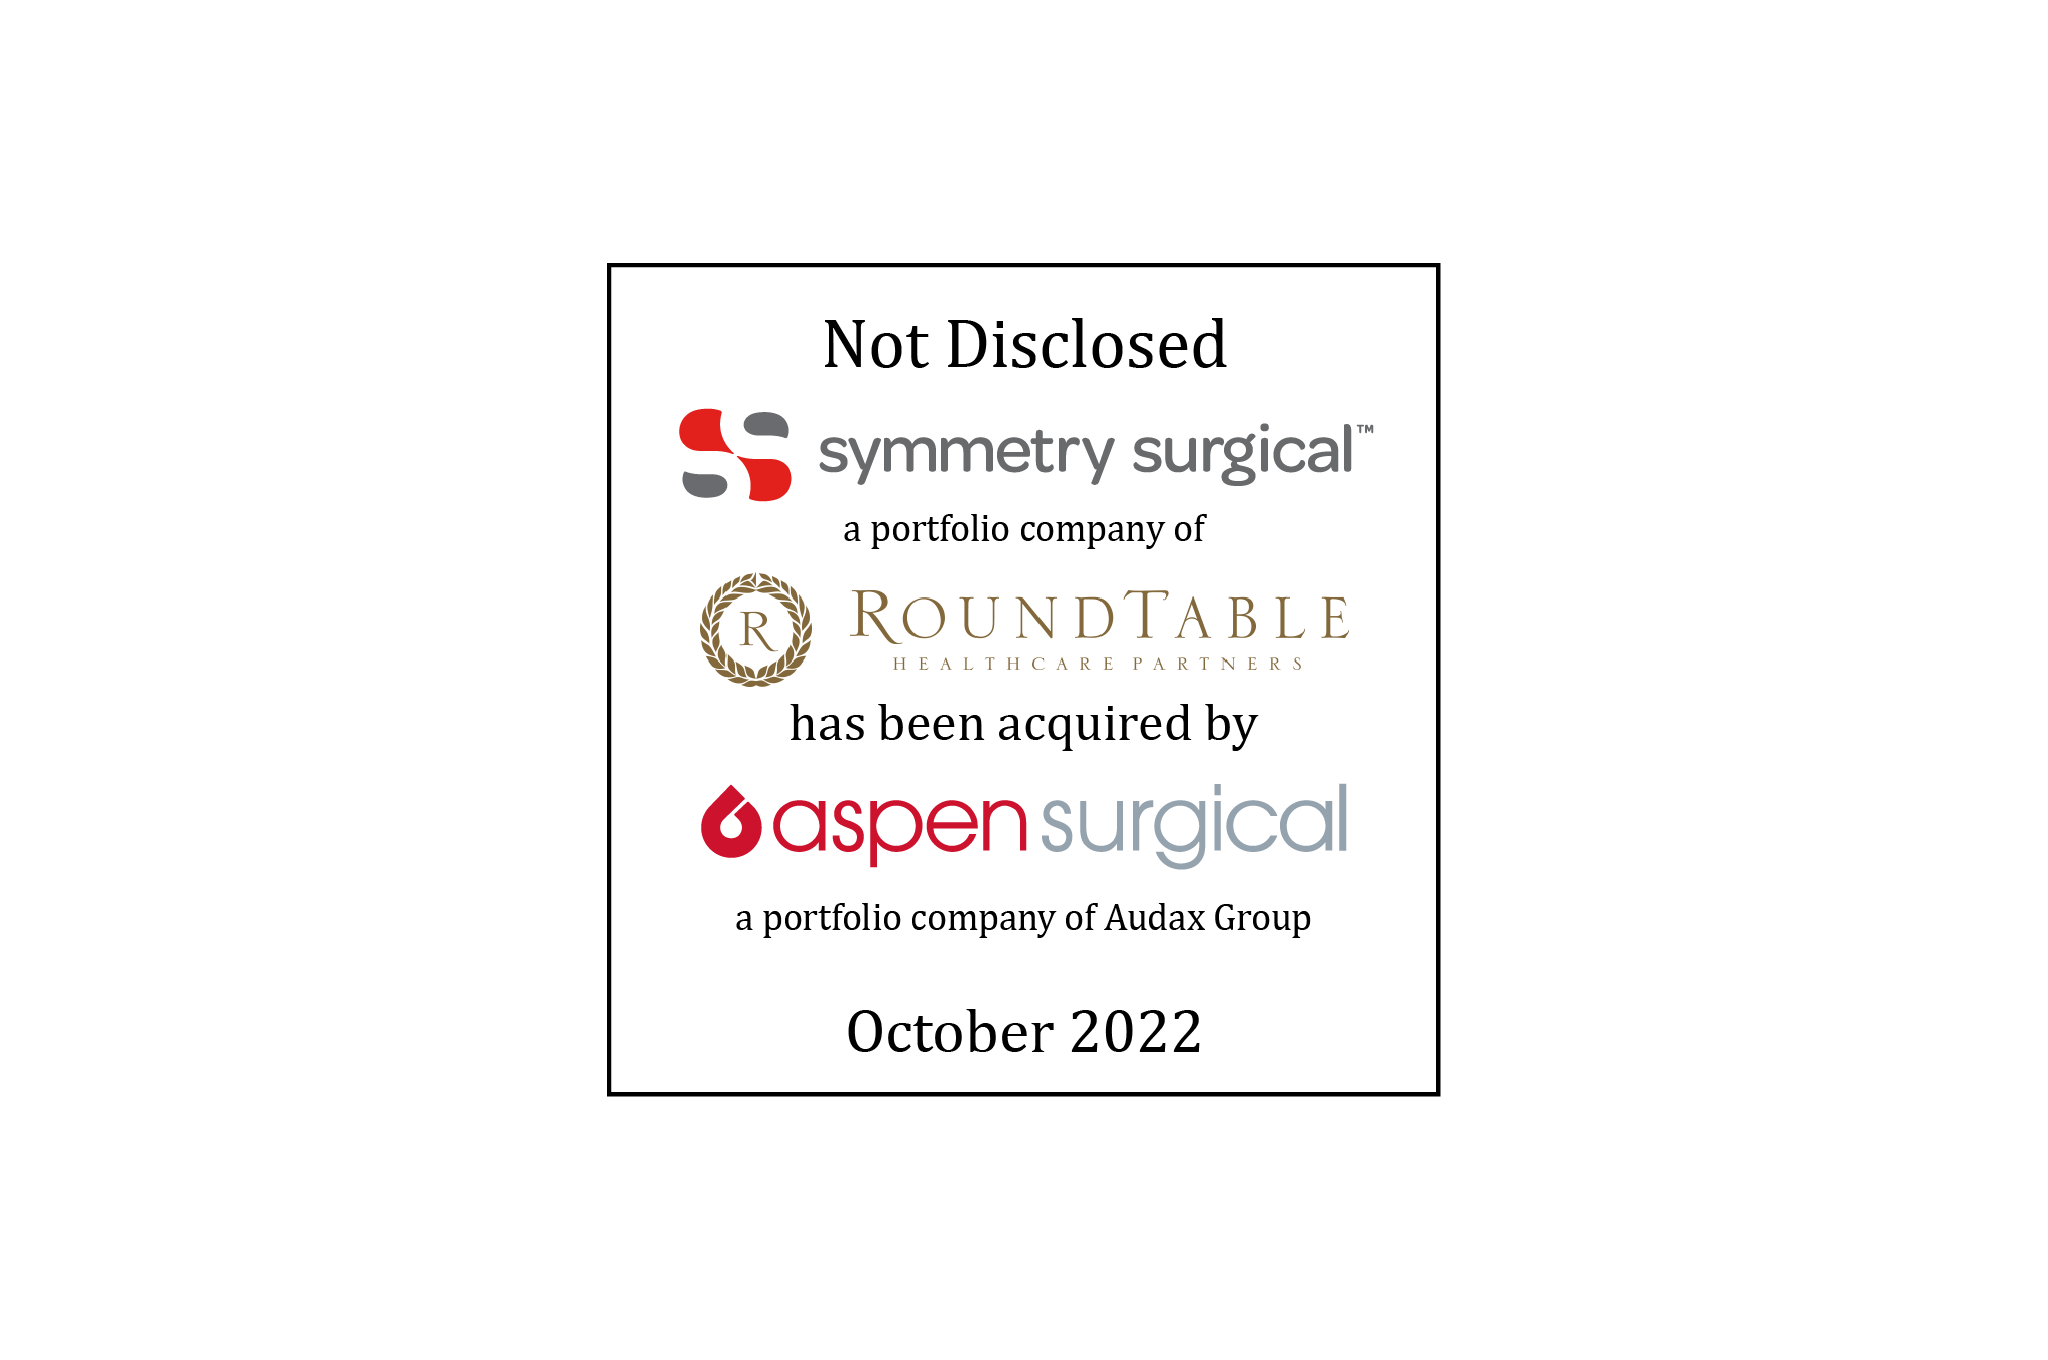 Not Disclosed | Symmetry Surgical (logo), a portfolio company of RoundTable Healthcare Partners (logo), has been acquired by Aspen Surgical Products (logo), a portfolio company of Audax Group | October 2022